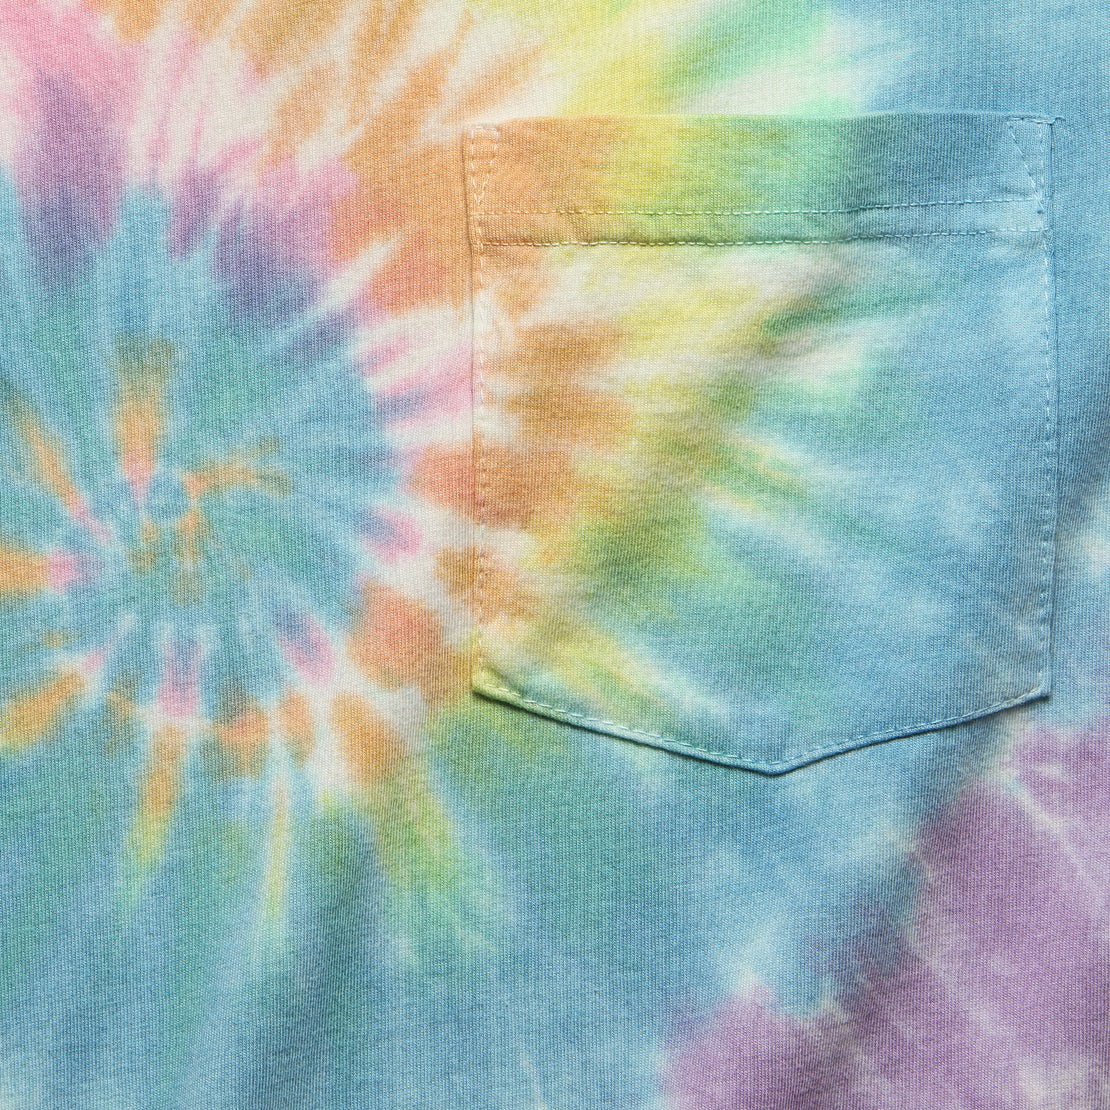 Long Sleeve Pocket Tee - Spiral Tie Dye - Battenwear - STAG Provisions - Tops - L/S Tee